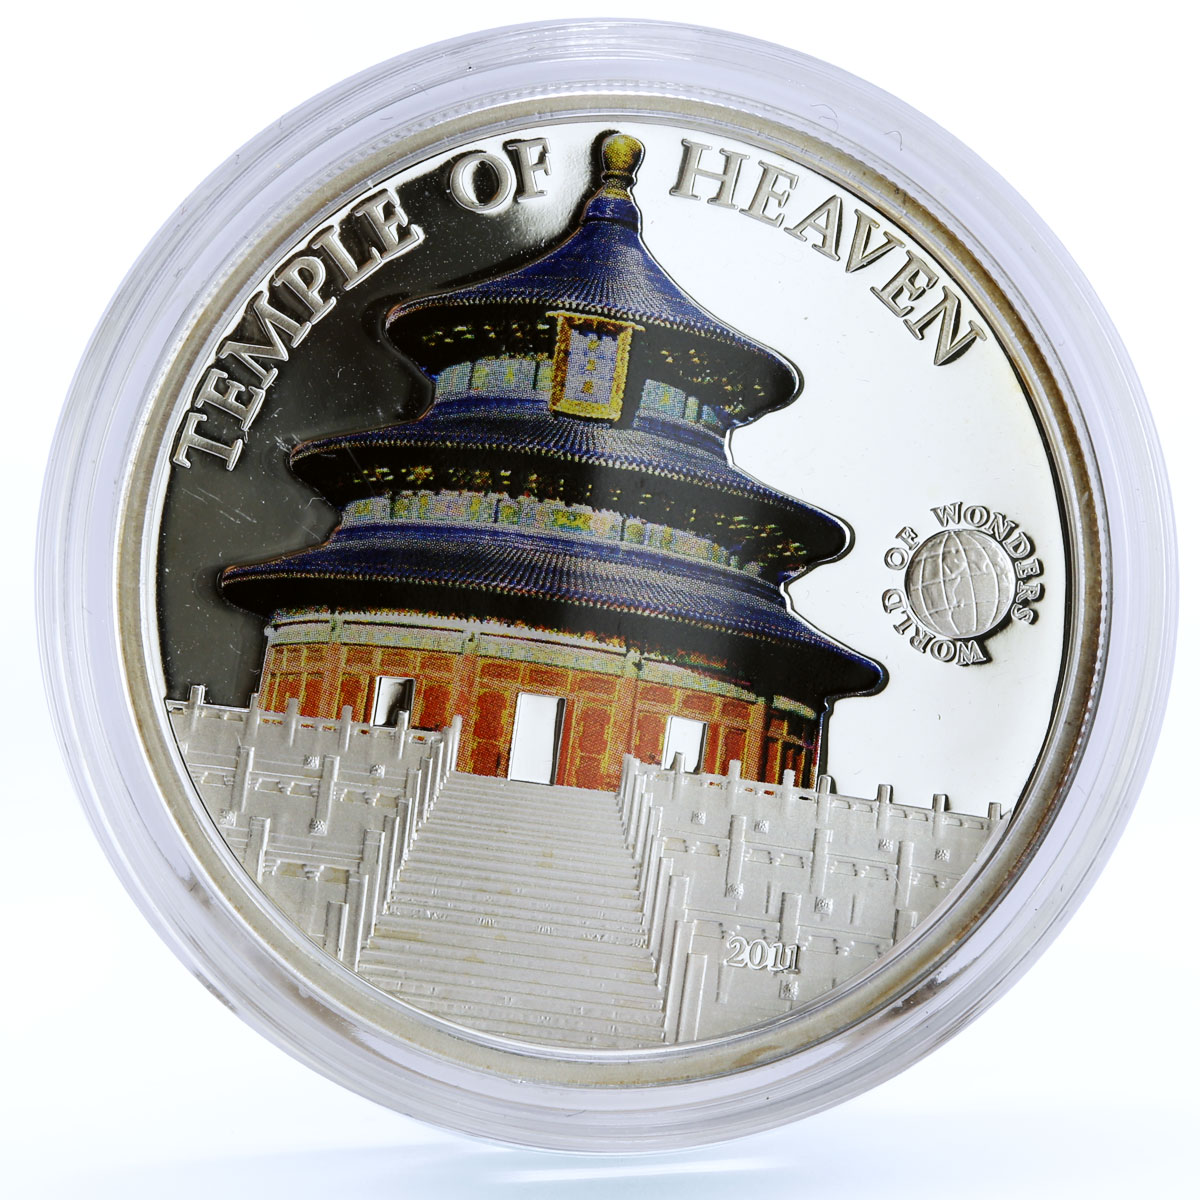 Palau 5 dollars World of Wonders Temple of Heaven Architecture silver coin 2011